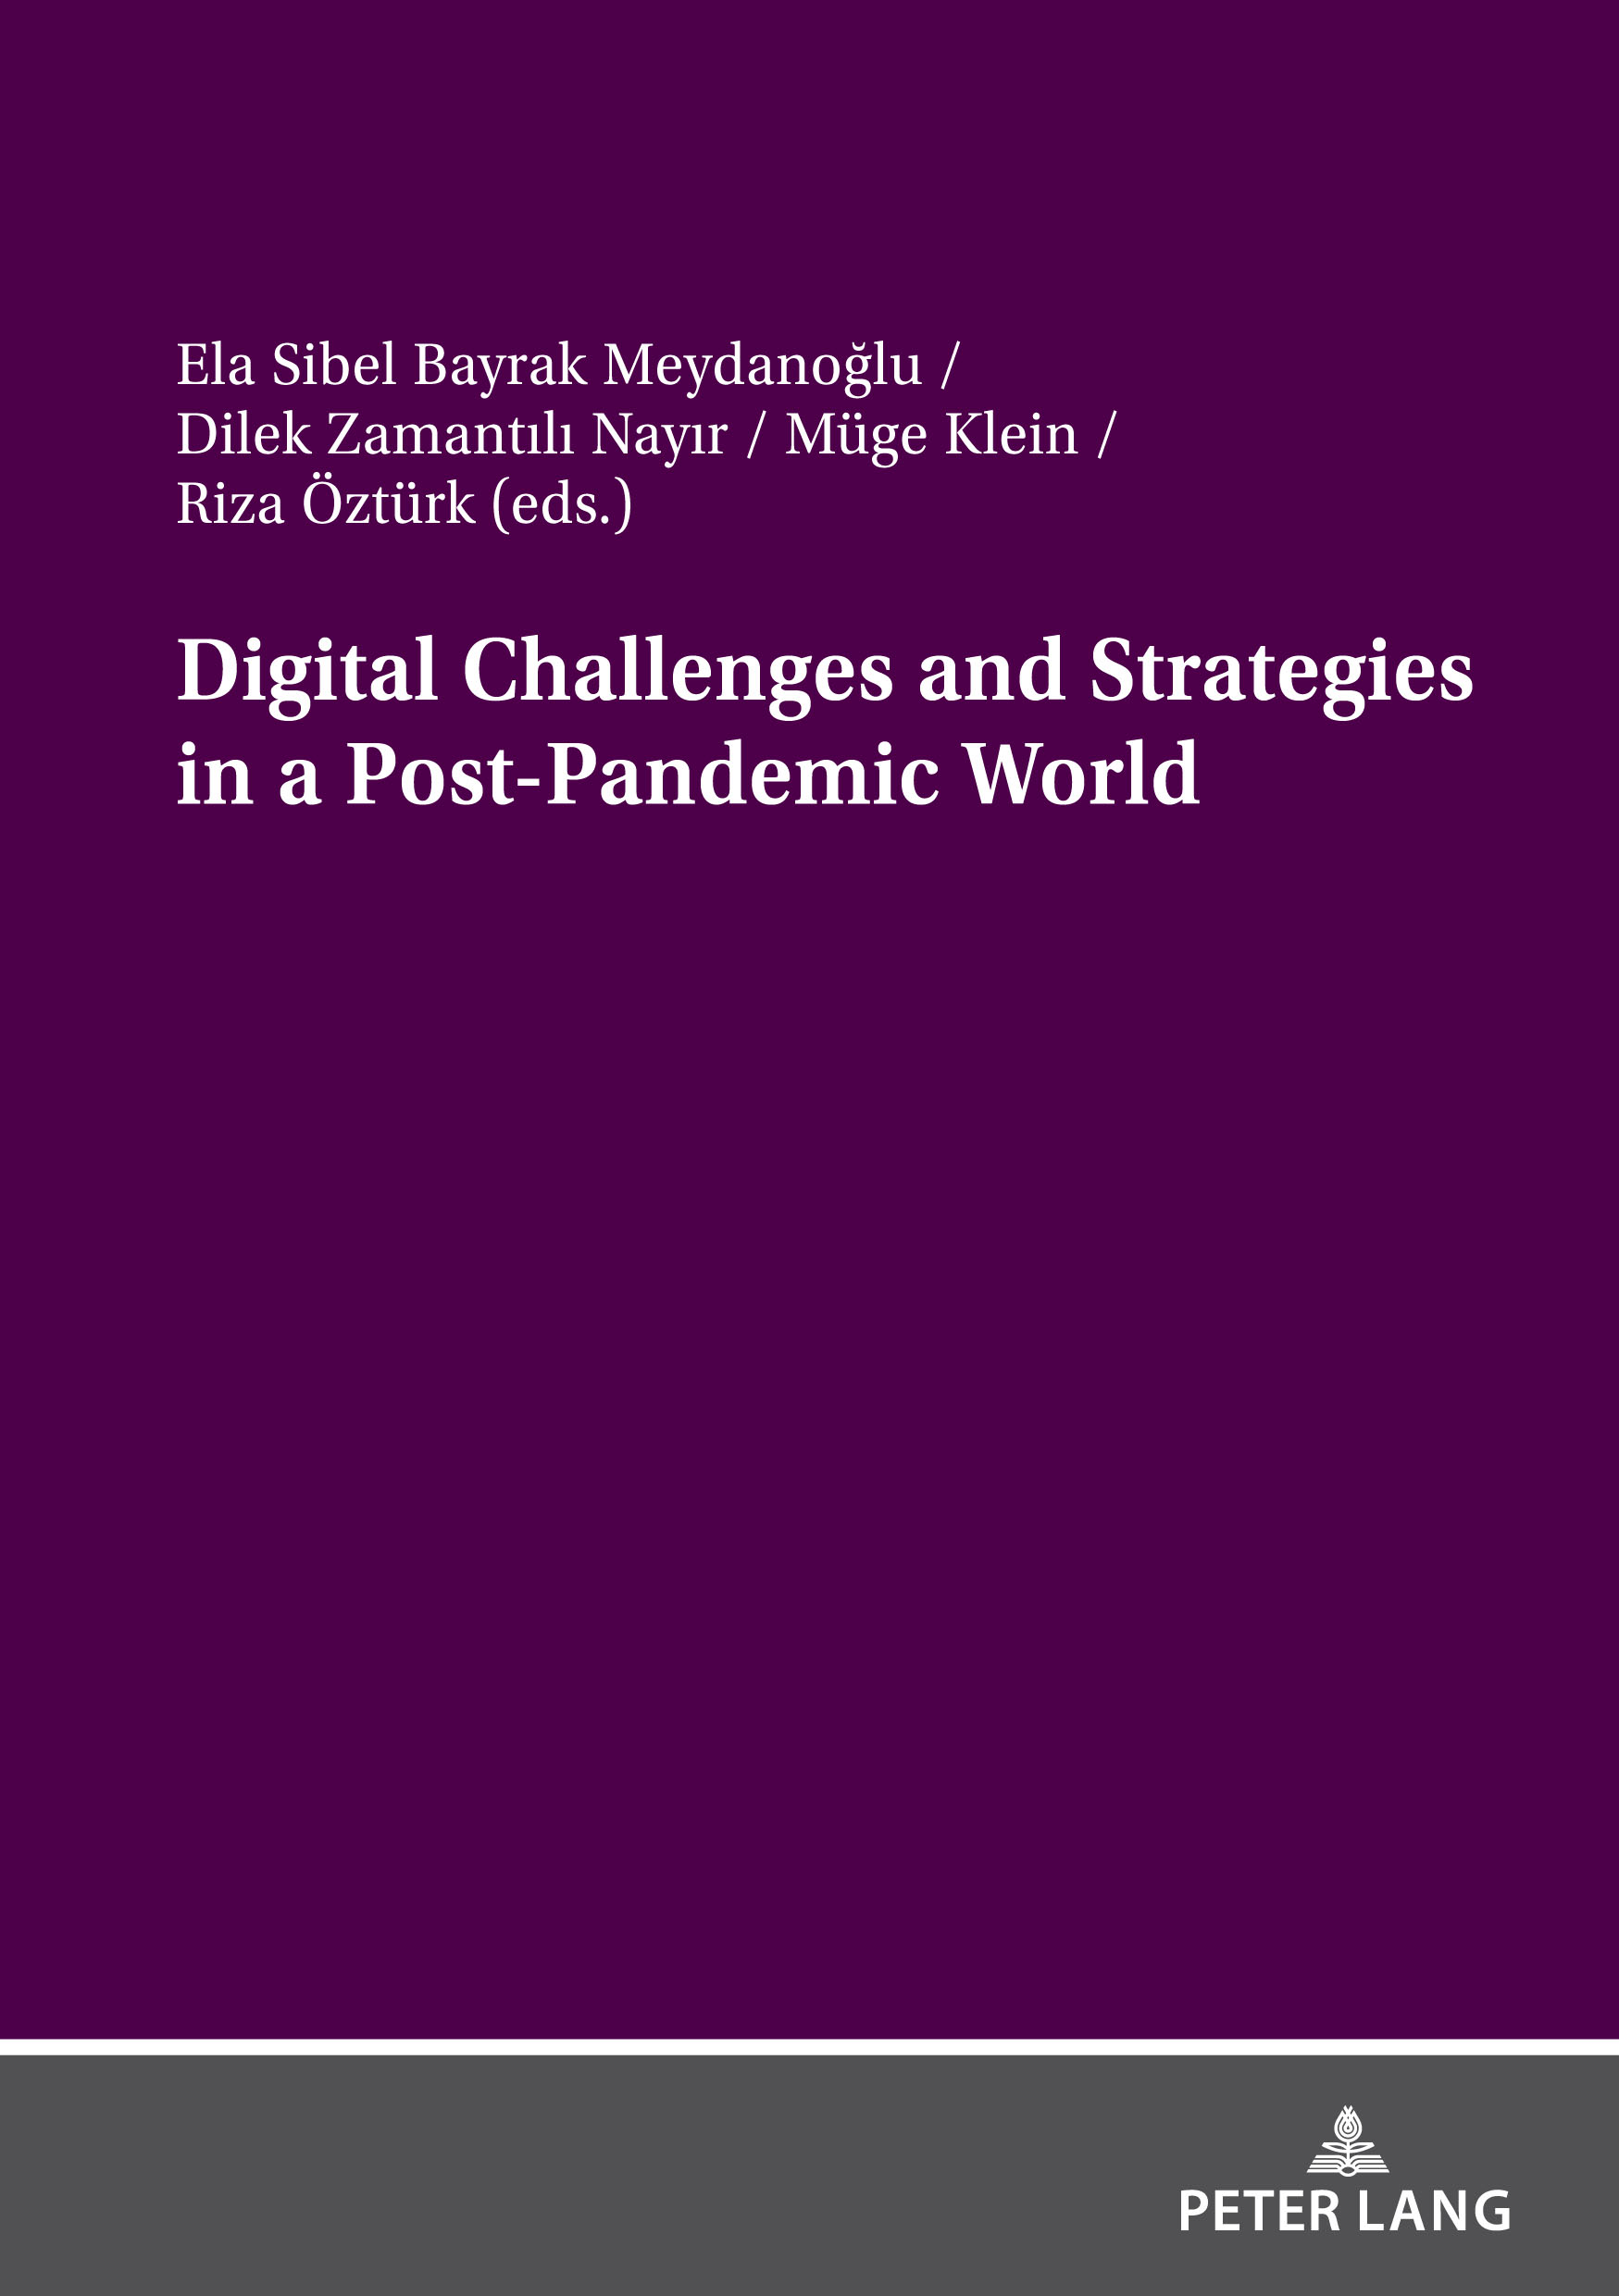 Digital Challenges and Strategies in a Post-Pandemic World